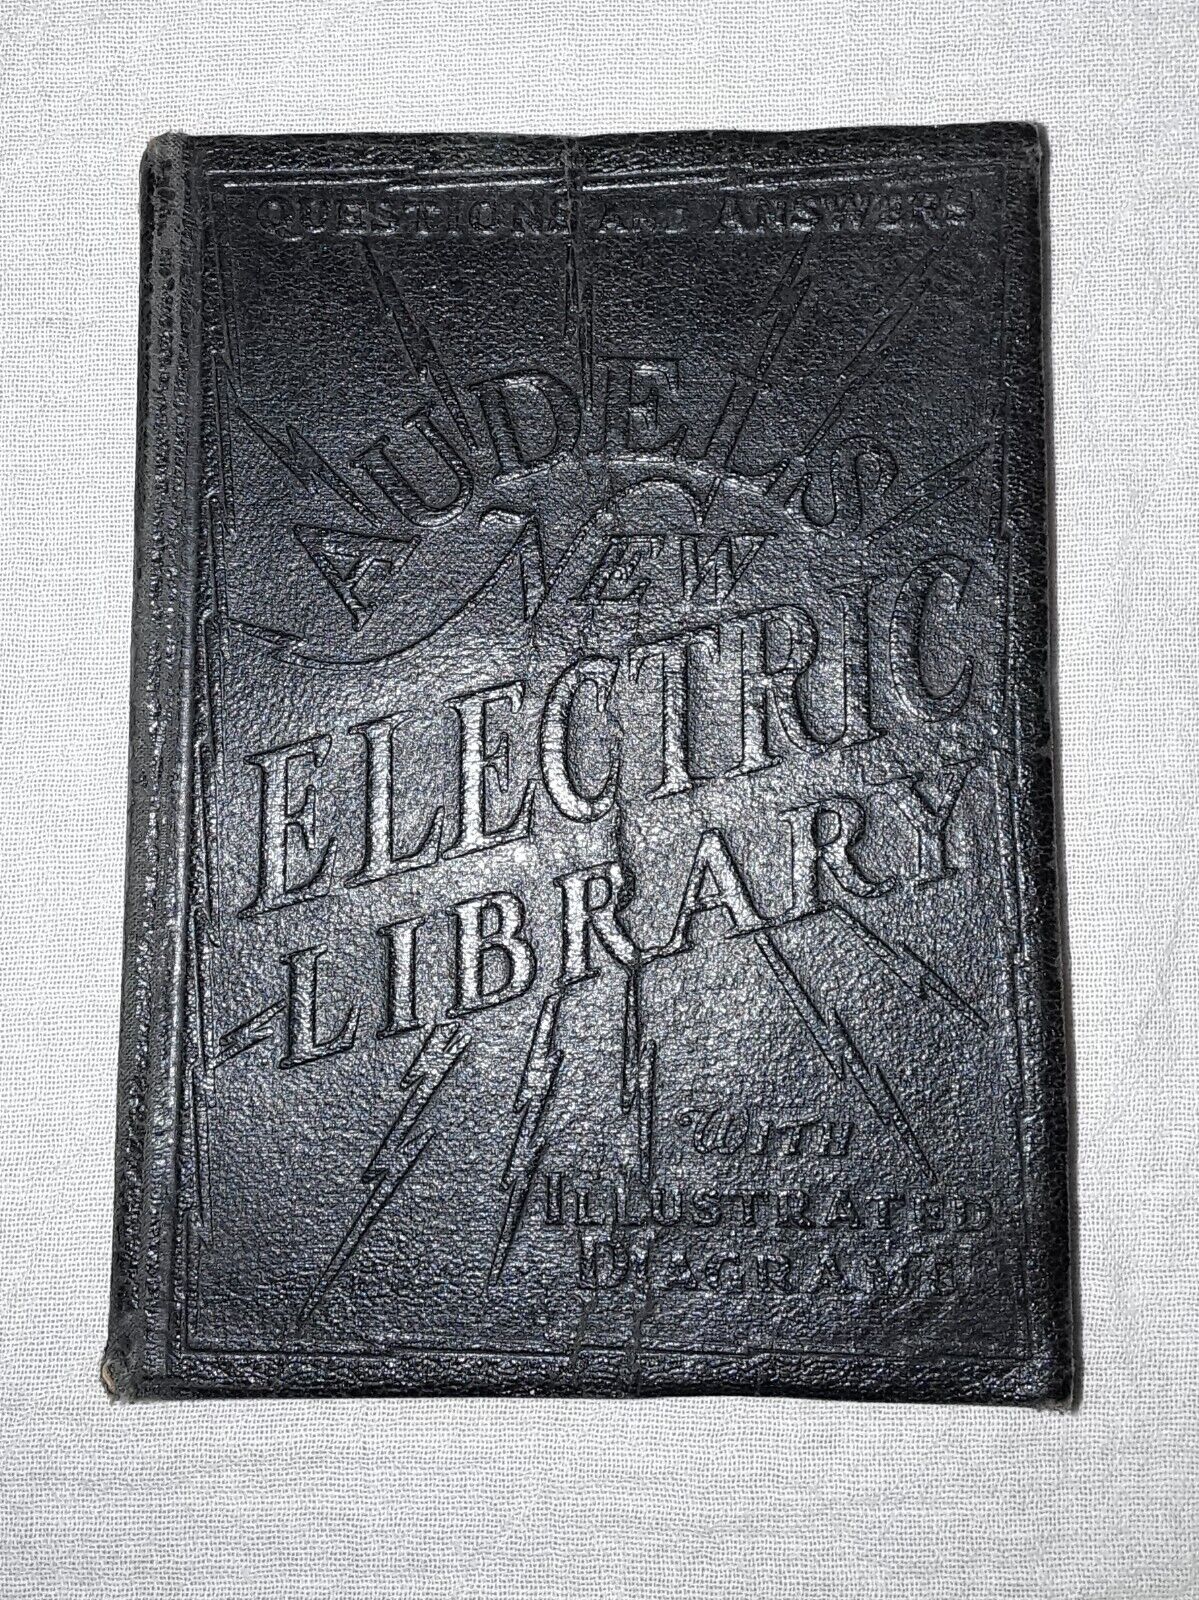 1954 AUDELS NEW ELECTRIC LIBRARY WITH ILLUSTRATED DIAGRAMS